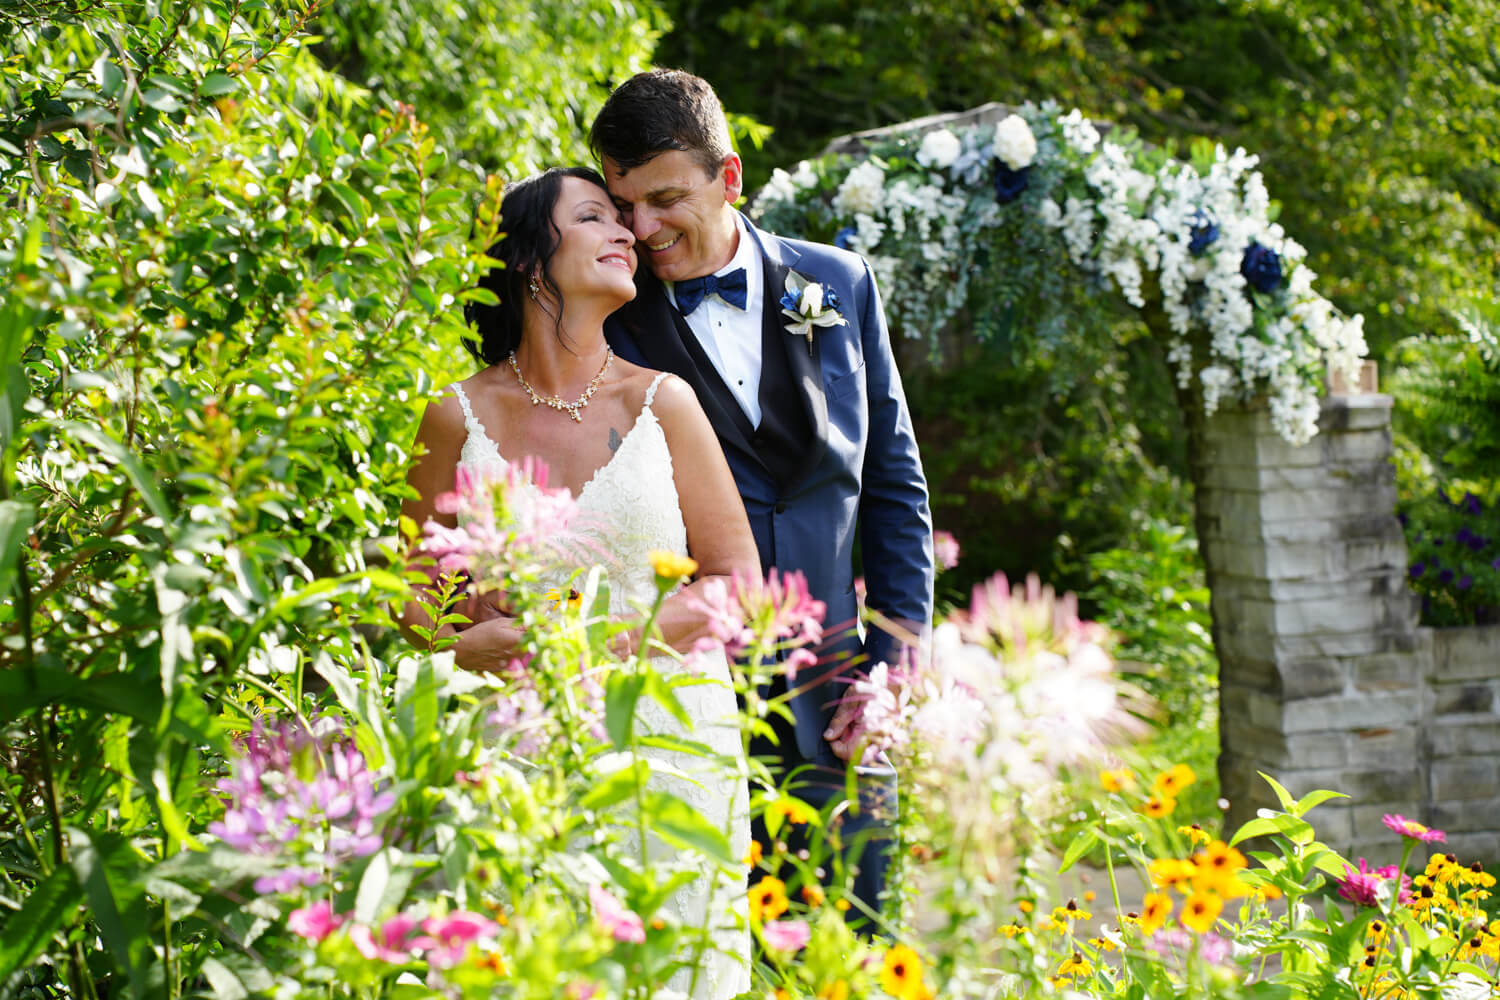 Wedding couple nuzzling each other in a wildflower garden by the stone arch at Honeysuckle Hills in Pigeon Forge